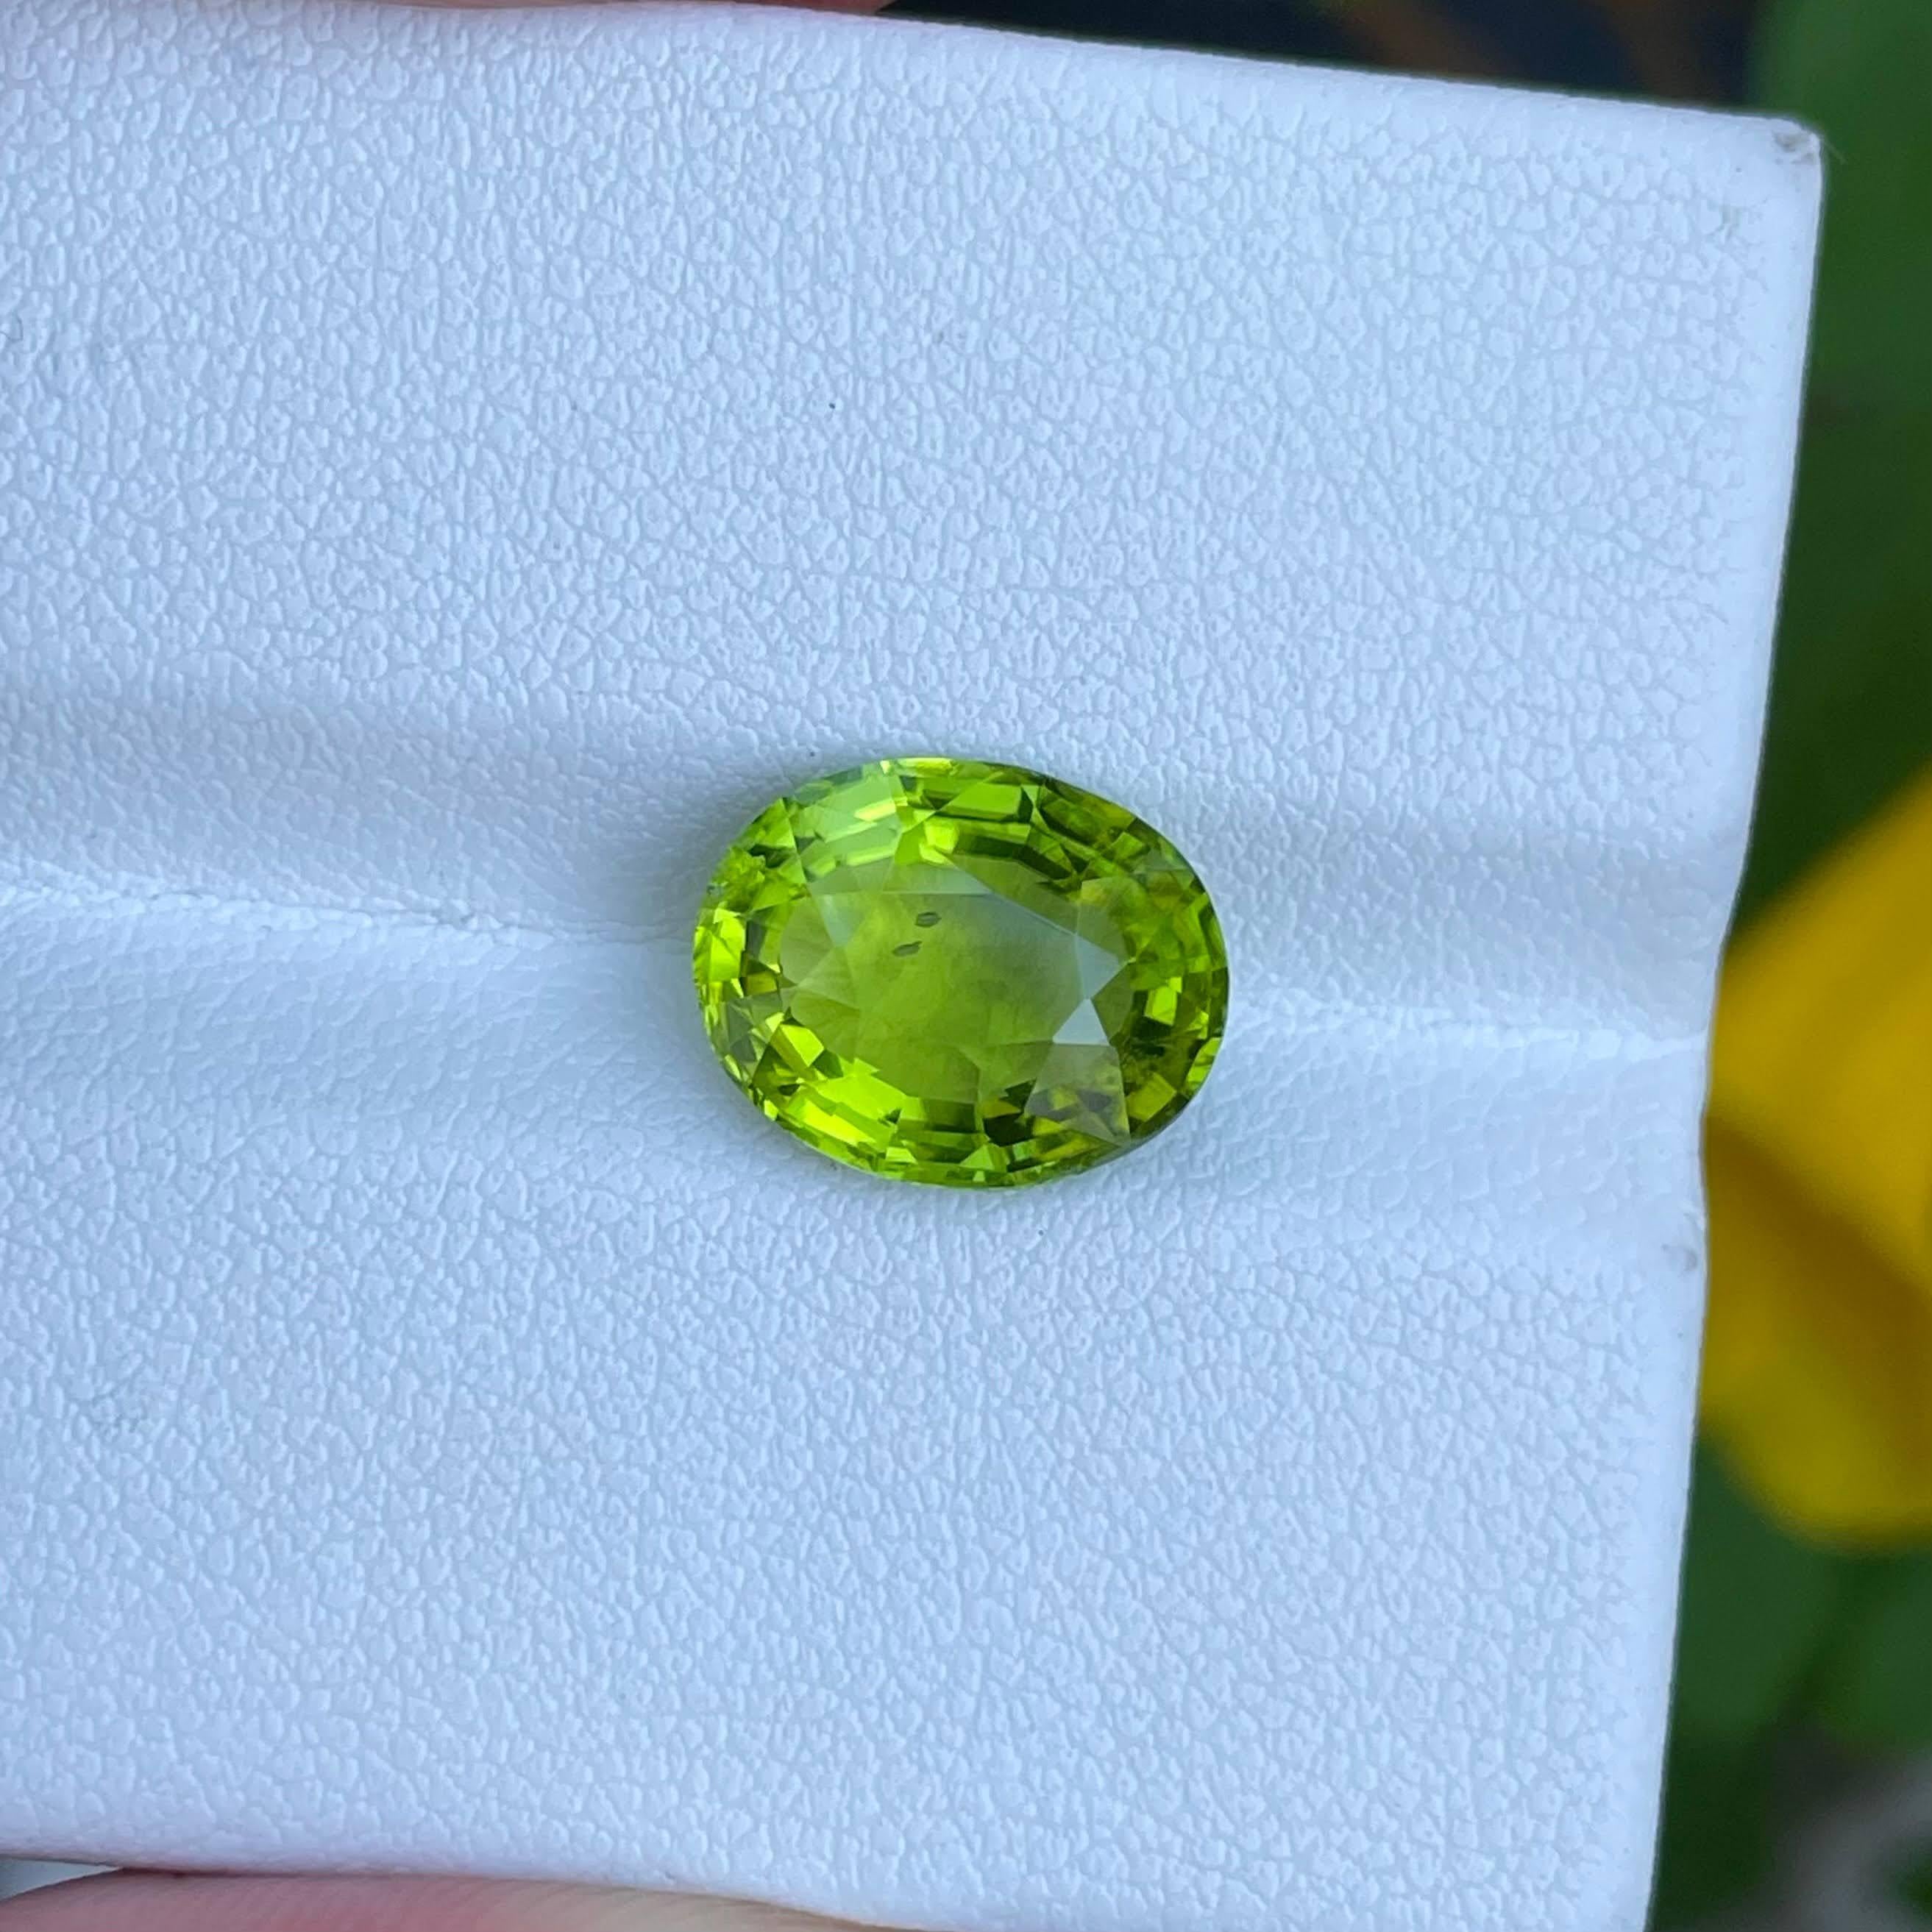 Weight 4.55 carats 
Dimensions 11.7x9.3x5.8 mm
Treatment none 
Origin Pakistan 
Clarity VVS
Shape oval 
Cut oval 




The exquisite beauty of this 4.55-carat Green Peridot Stone is truly captivating, showcasing a Fancy Oval Cut that enhances its